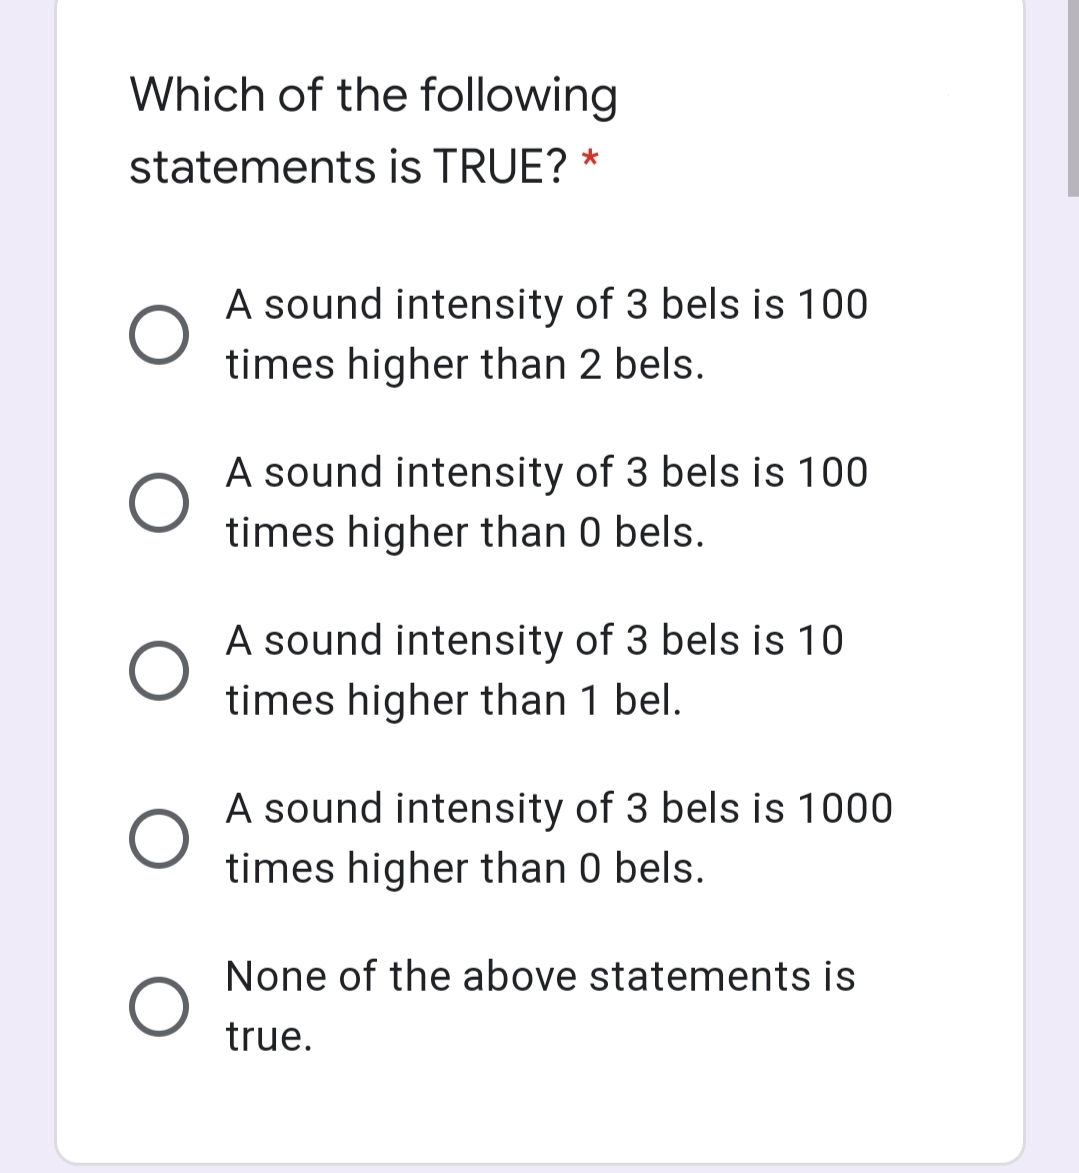 Which of the following
statements is TRUE? *
A sound intensity of 3 bels is 100
times higher than 2 bels.
A sound intensity of 3 bels is 100
times higher than 0 bels.
A sound intensity of 3 bels is 10
times higher than 1 bel.
A sound intensity of 3 bels is 1000
times higher than 0 bels.
None of the above statements is
true.
